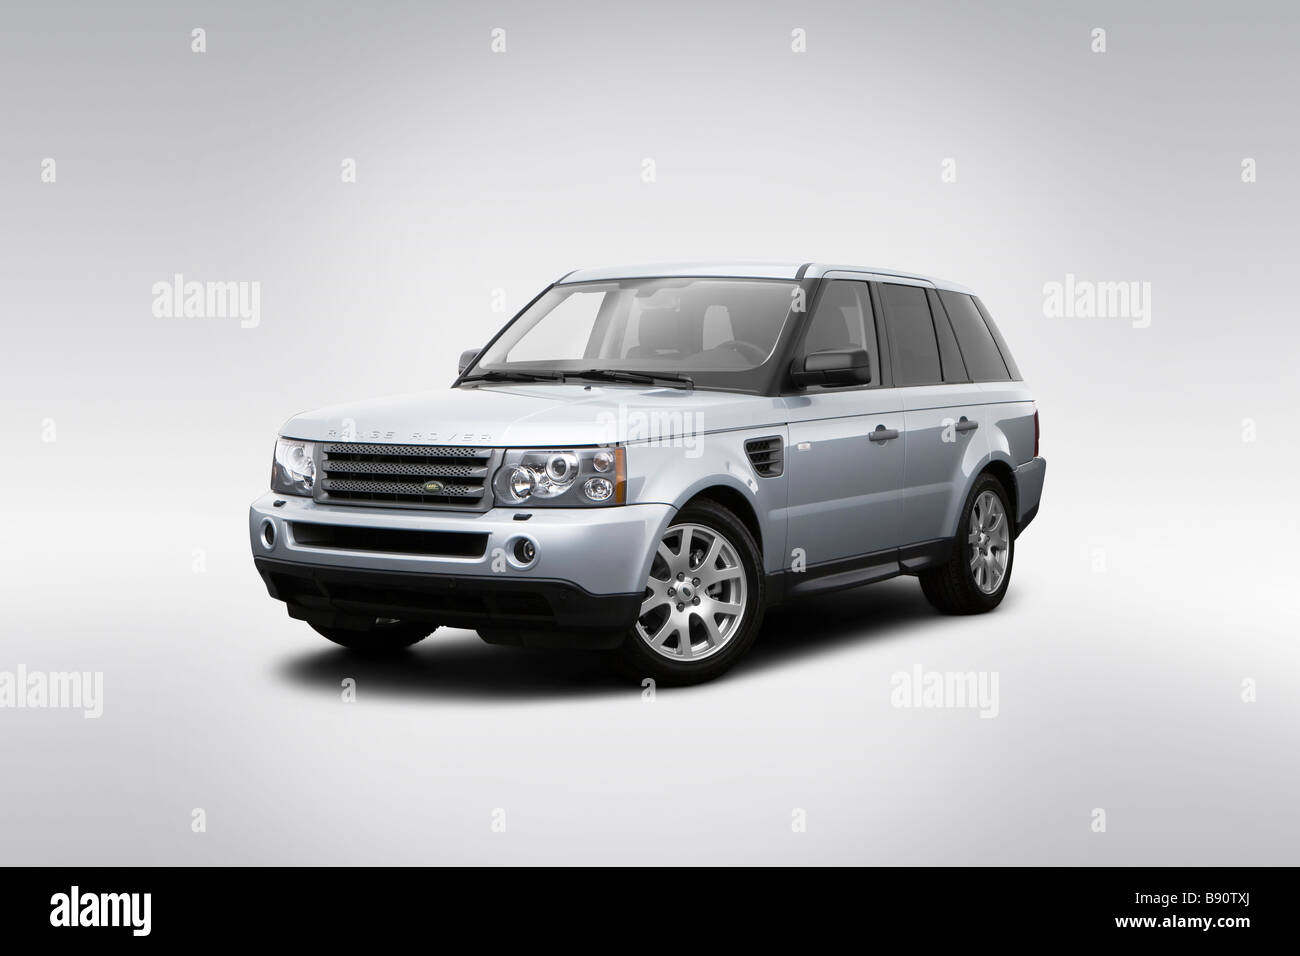 Land rover range rover sport hse hi-res stock photography and images - Alamy